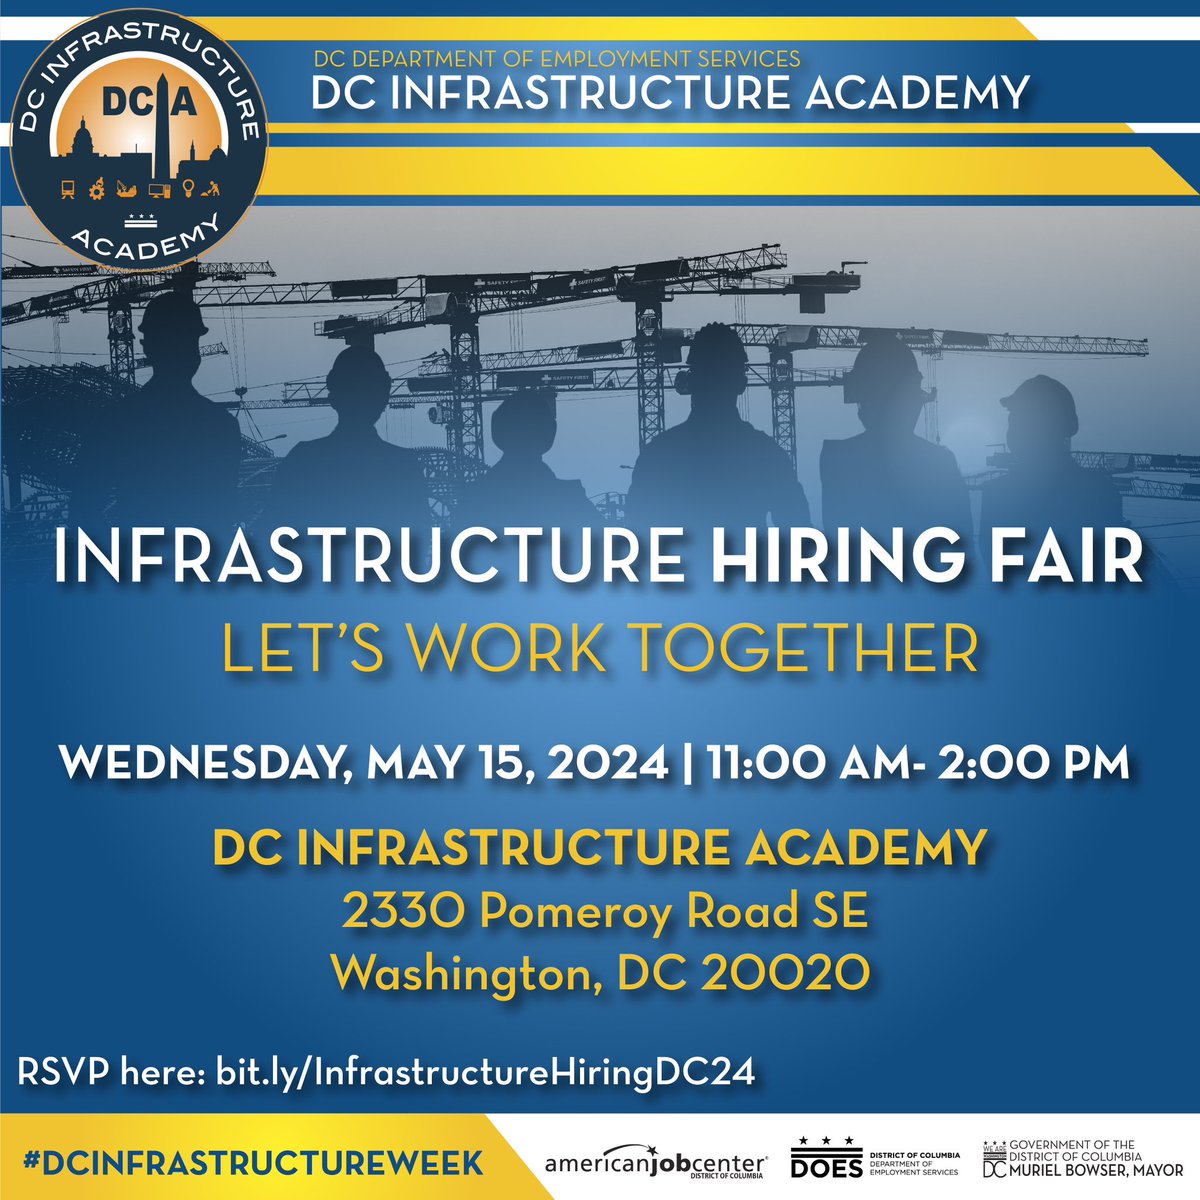 Let’s work together! Join the #DCInfrastructureWeek Hiring Fair.   🗓️ Wednesday, May 15 ⏰11:00 AM 📍 2330 Pomeroy Road SE   Dress to impress and please bring multiple copies of your updated resume.   To learn more and register, visit bit.ly/Infrastructure….